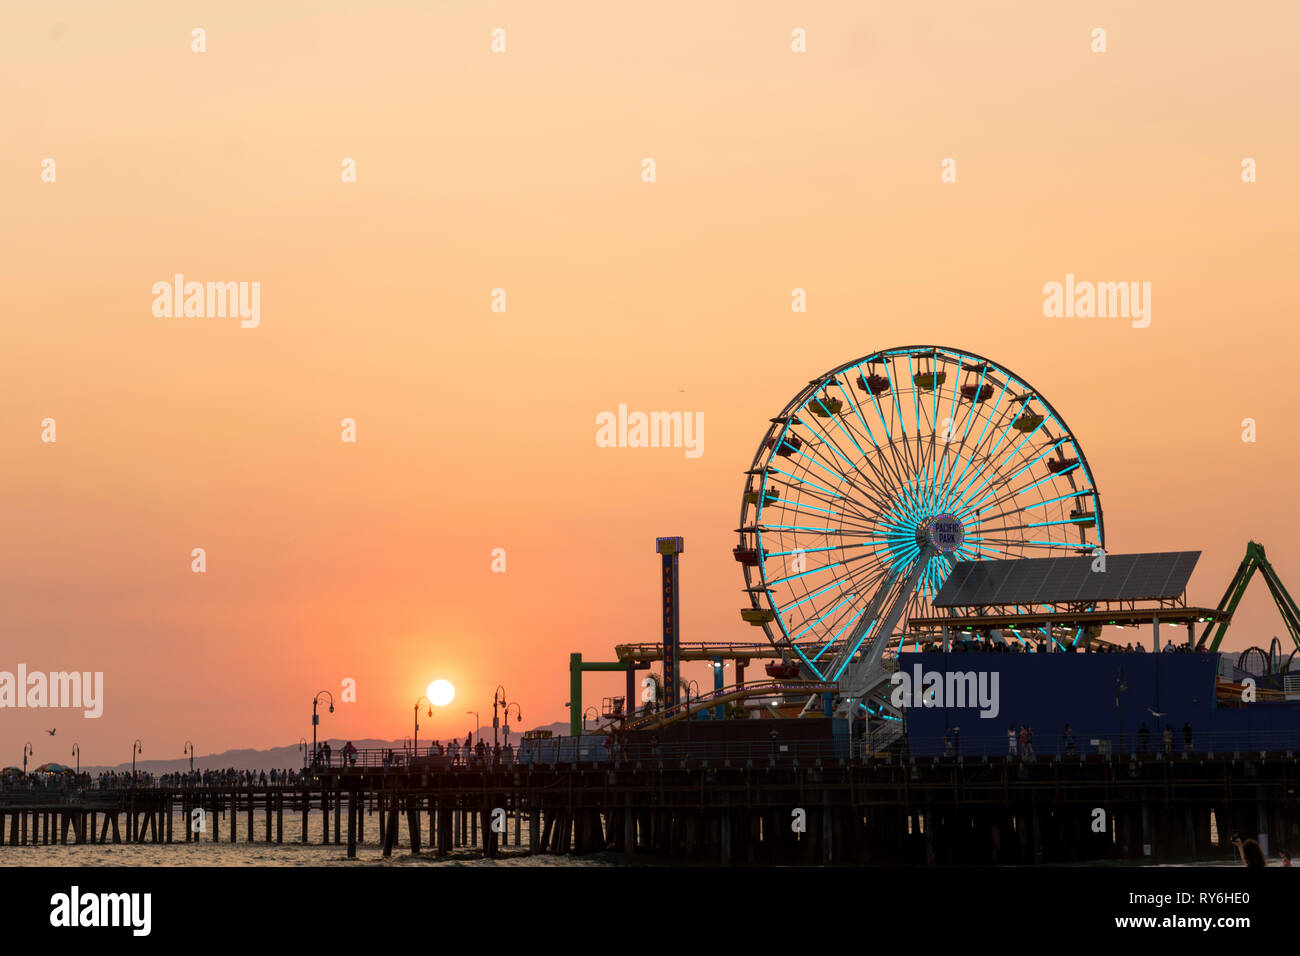 Silhouette pier over sea against clear orange sky during sunset Stock Photo